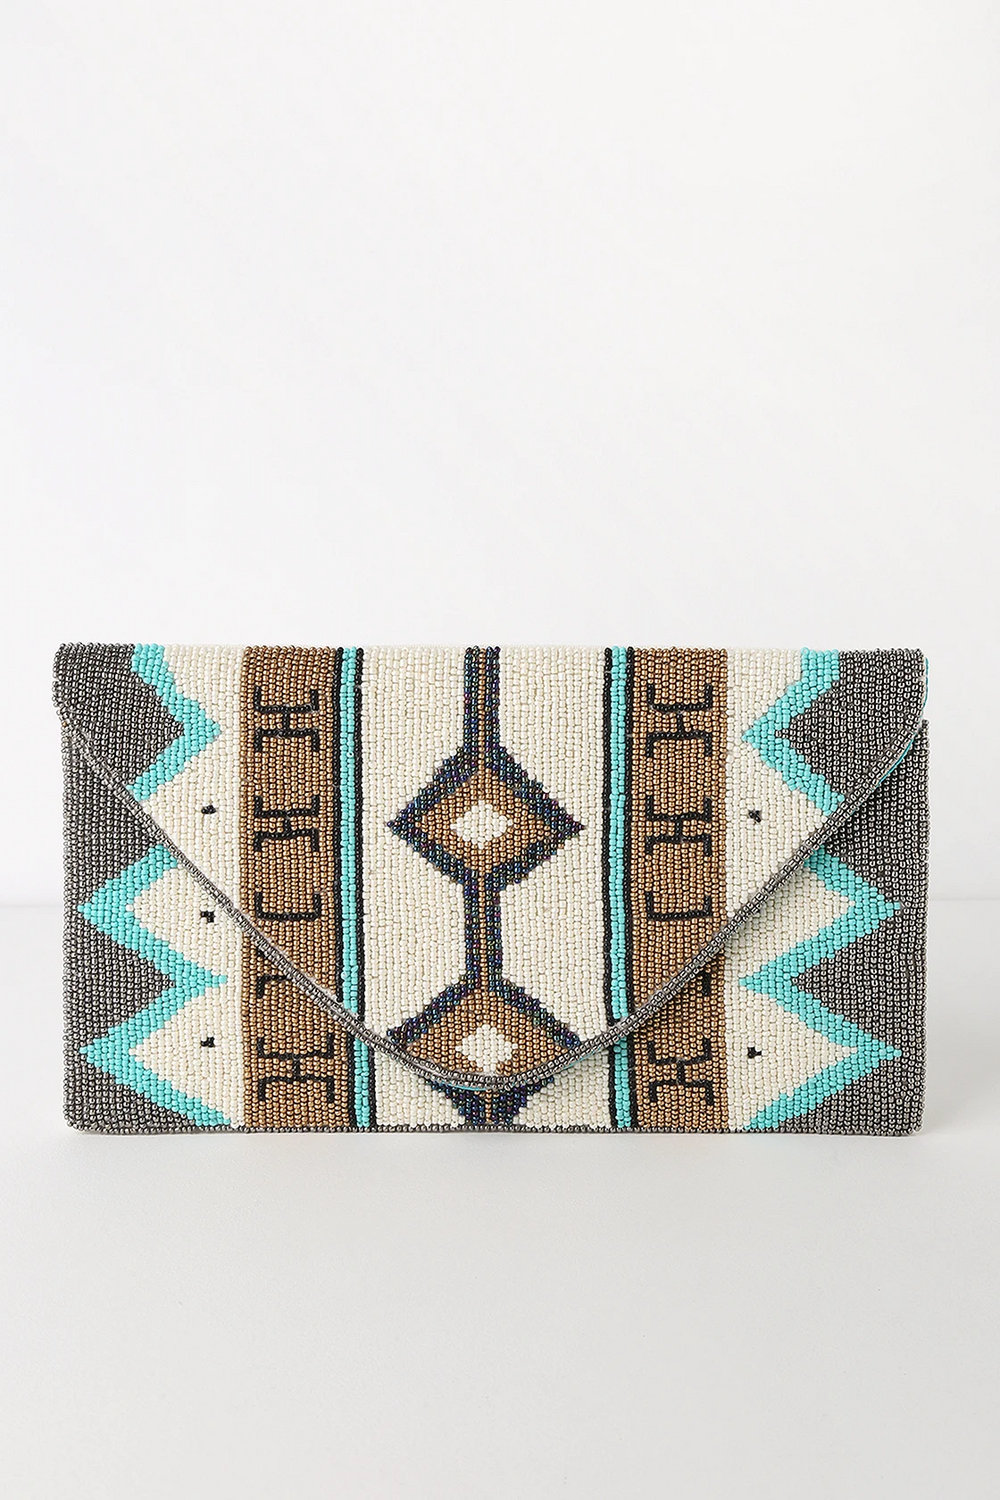 TURQUOISE/GOLD GEOMETRIC BEADED CLUTCH - Kingfisher Road - Online Boutique